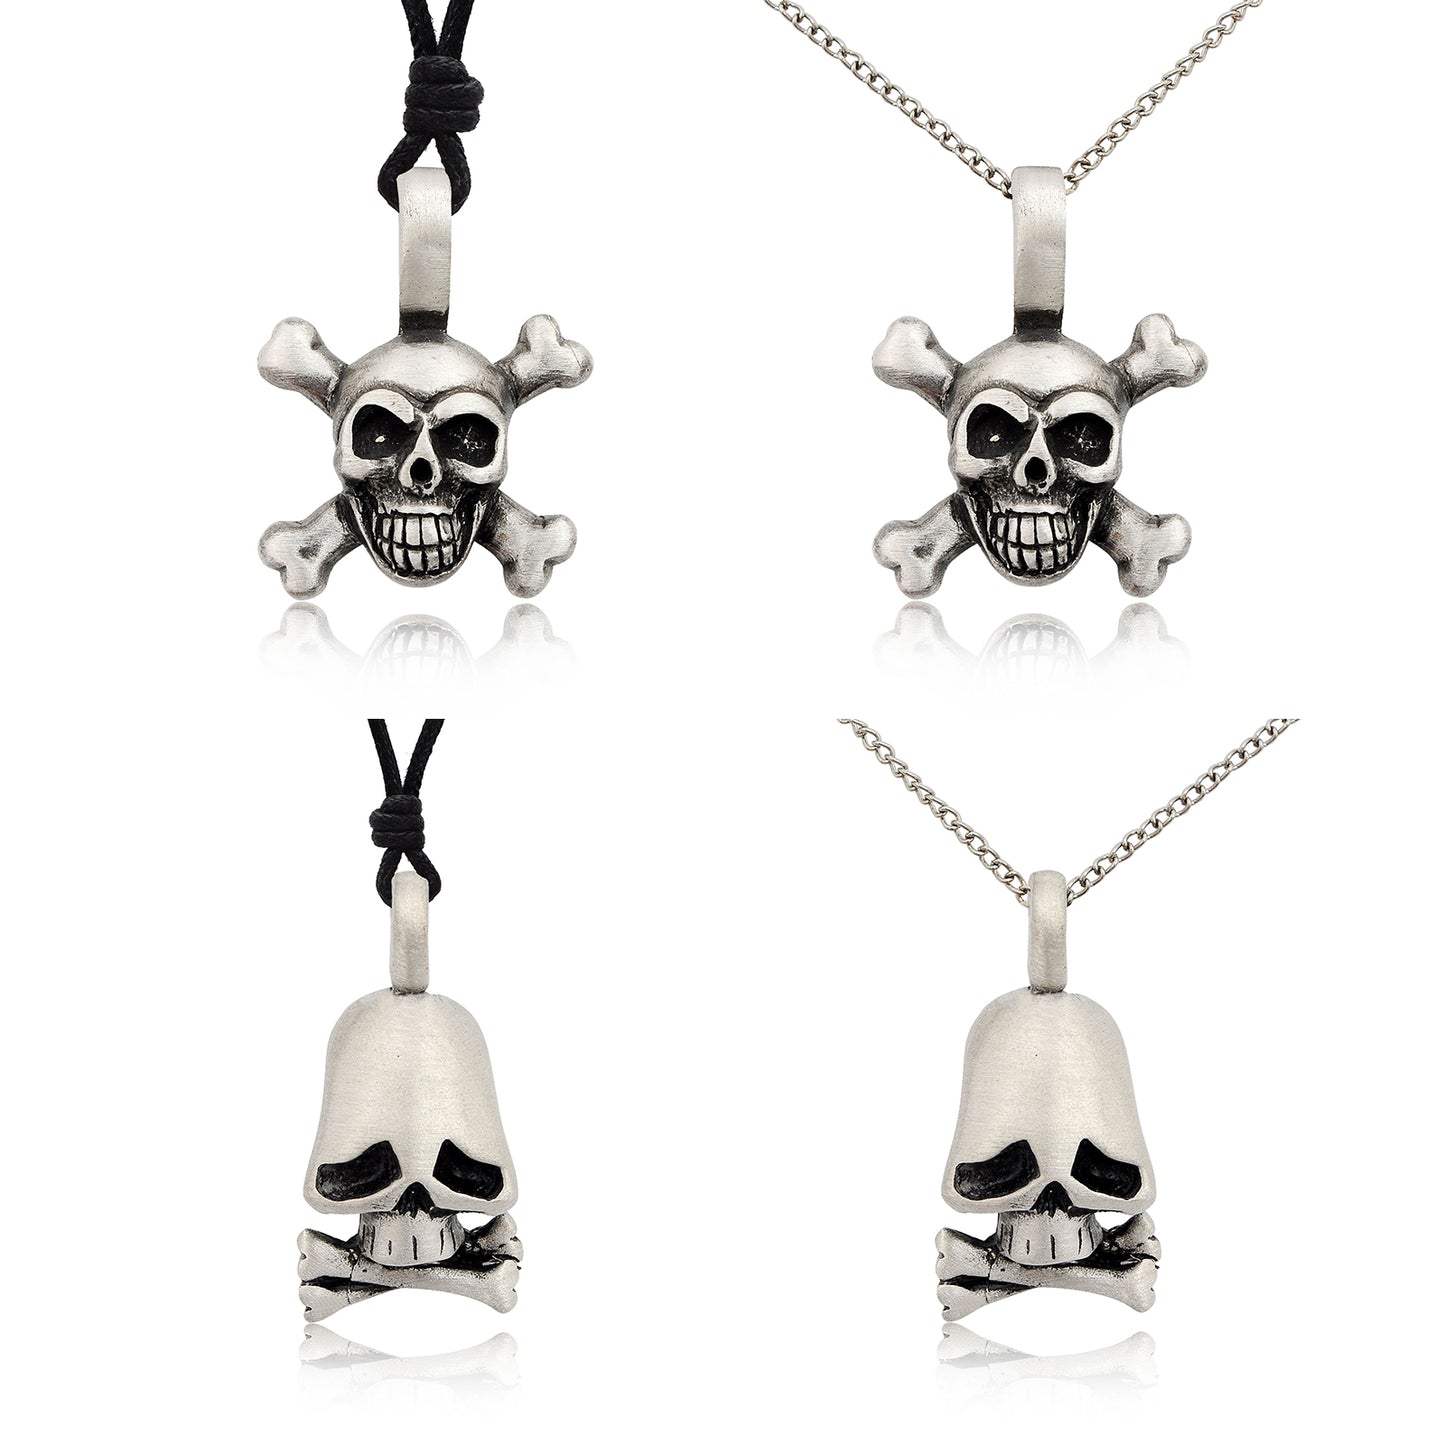 Skull Skeleton Silver Pewter Charm Necklace Pendant Jewelry